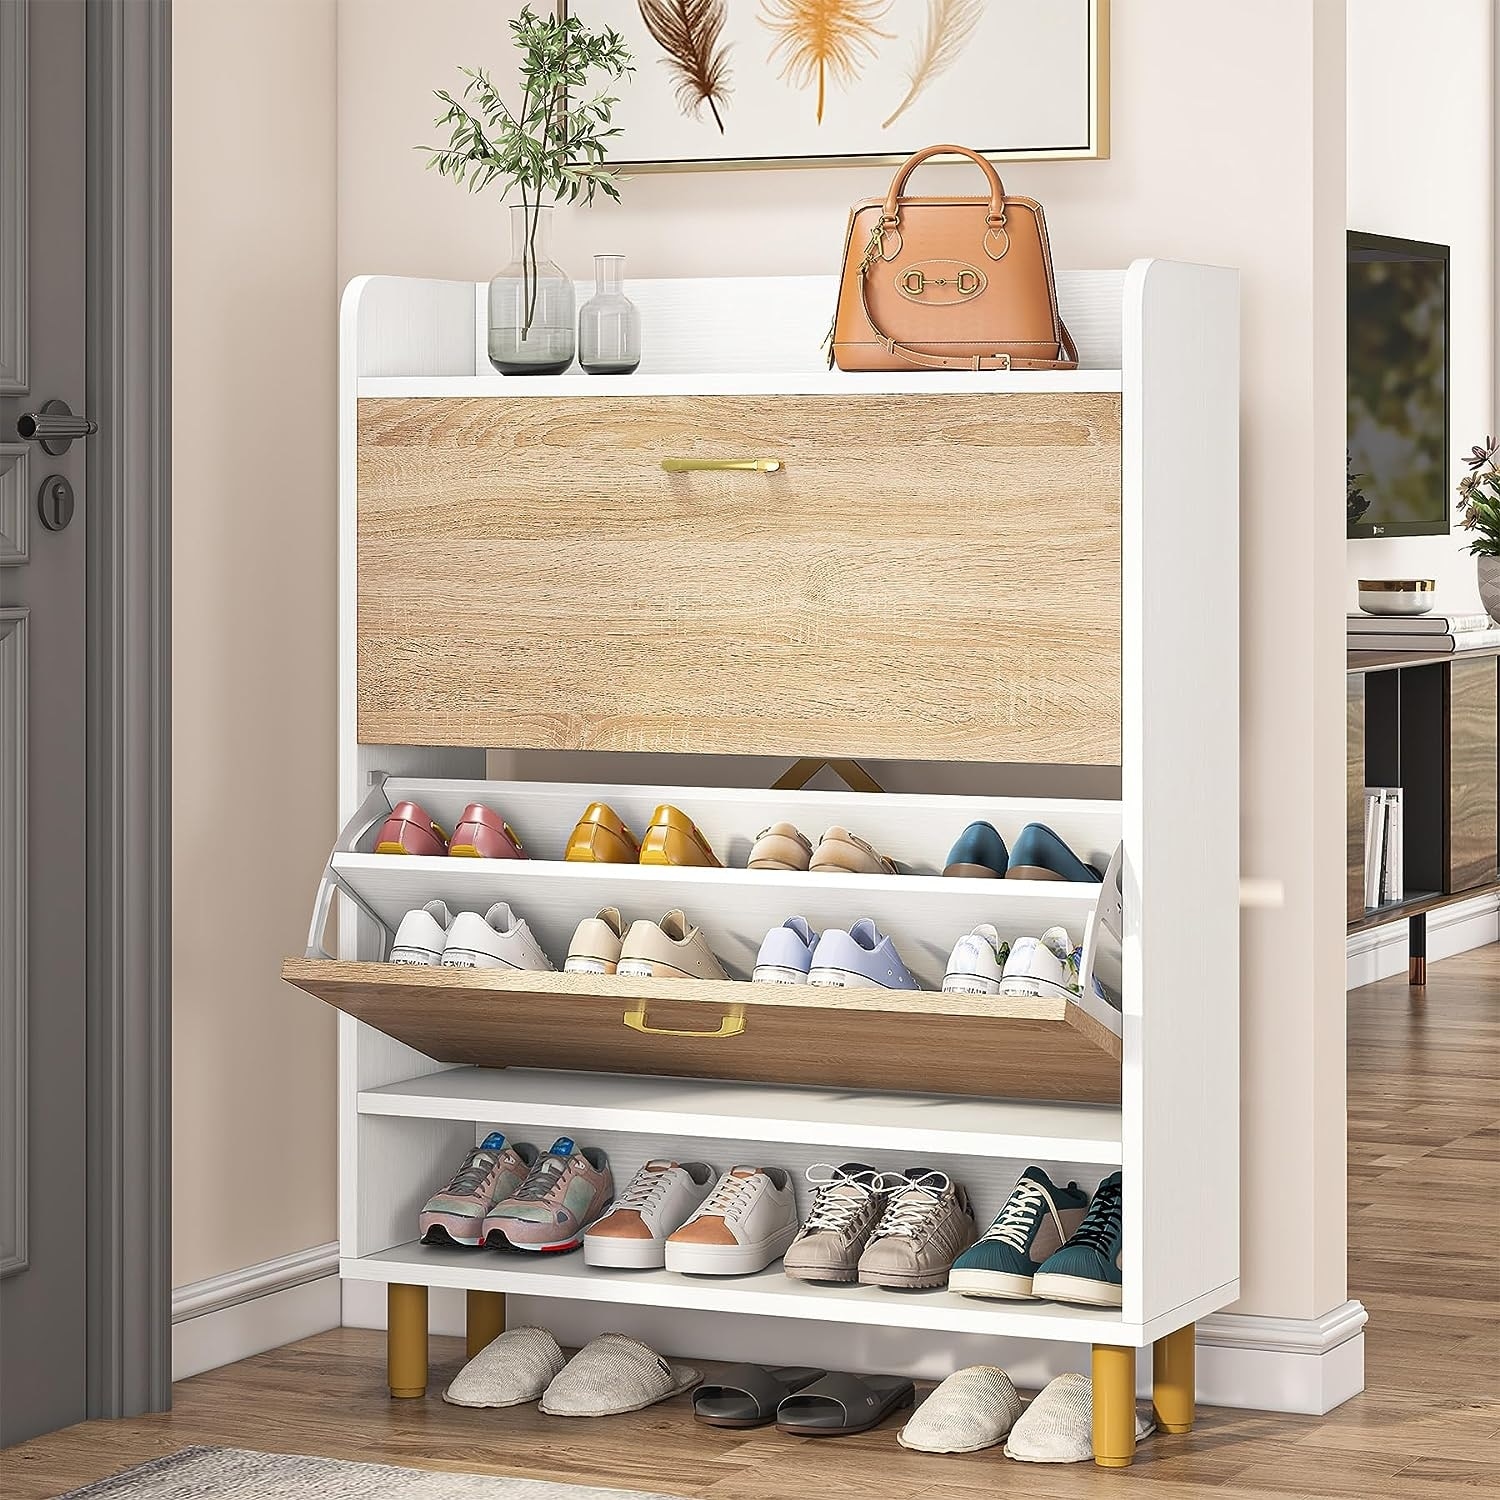 https://ak1.ostkcdn.com/images/products/is/images/direct/3a55a161b197c9761a11ea056a43c27d1d8920a1/Shoe-Storage-Cabinet%2C-24-Pair-Shoe-Storage-with-2-Drawers%2C-Brown-White.jpg